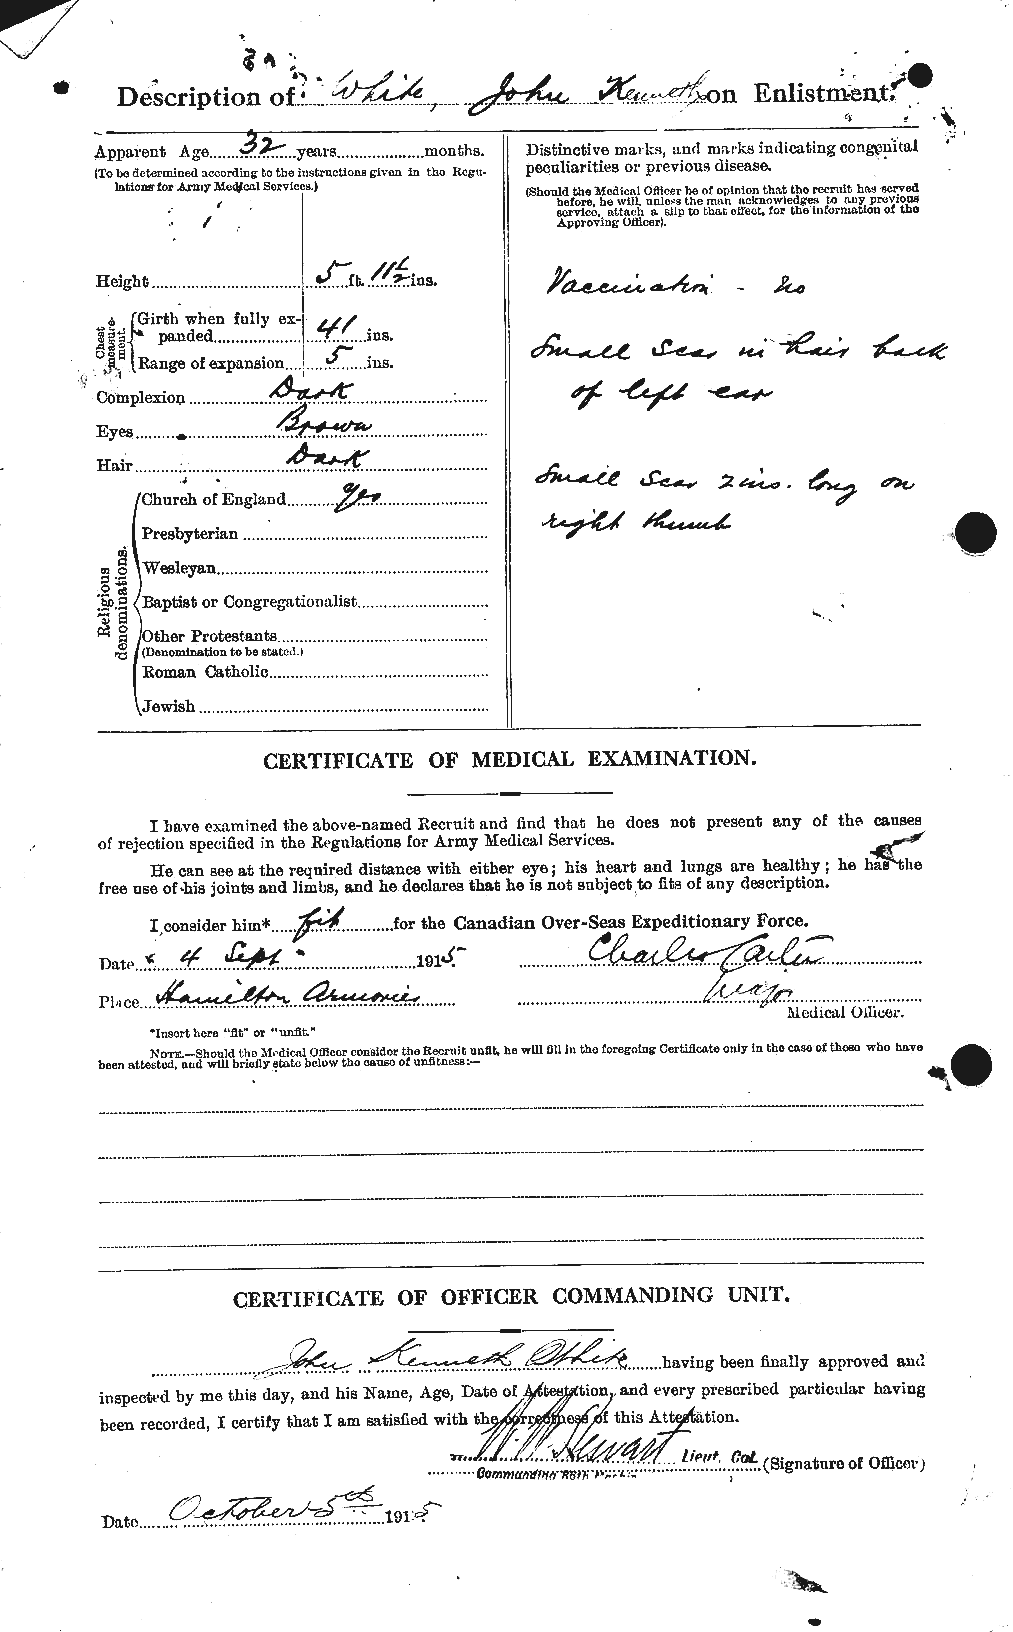 Personnel Records of the First World War - CEF 671579b